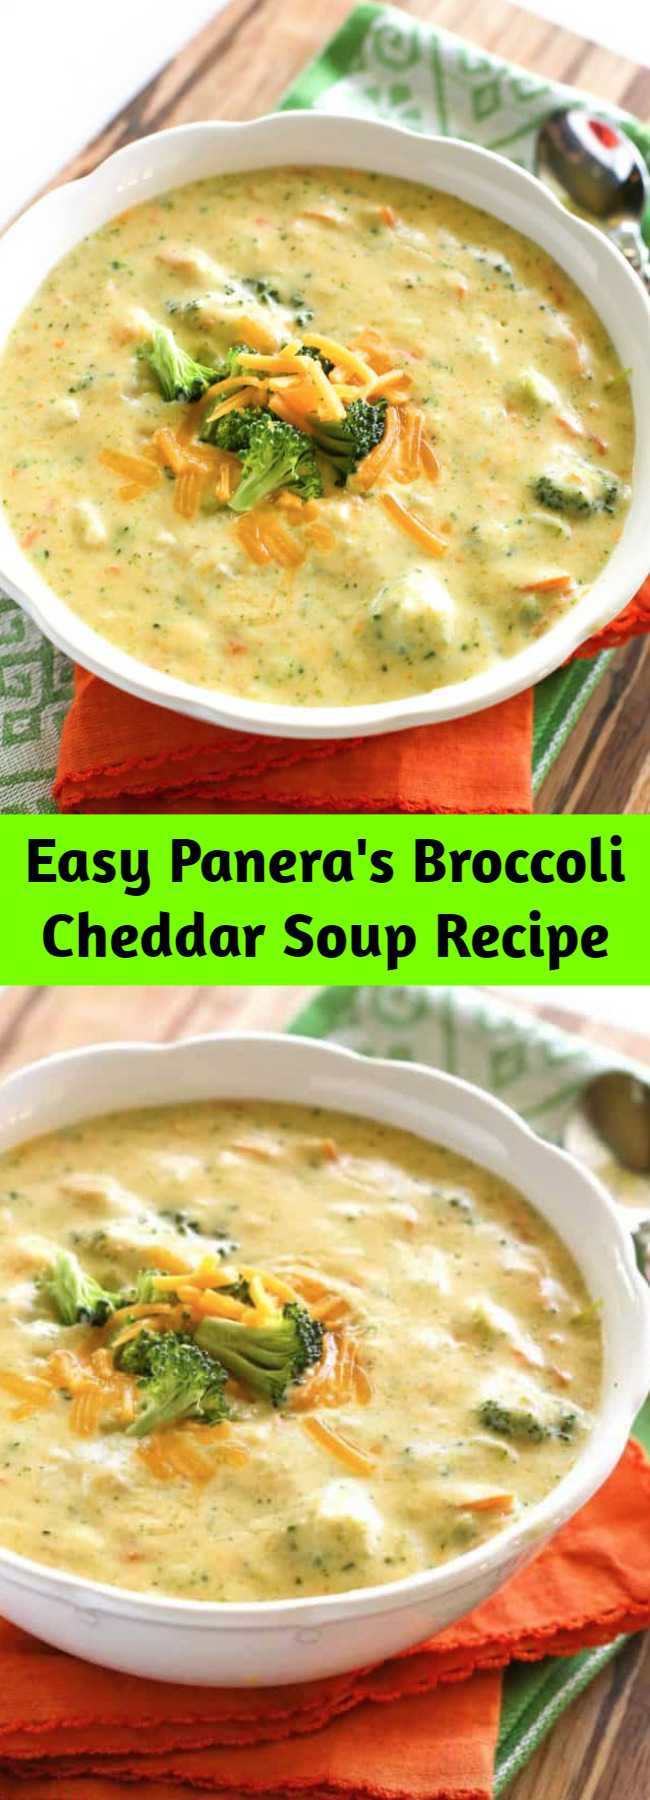 Easy Panera's Broccoli Cheddar Soup Recipe - Creamy broccoli cheddar soup is comfort food at its best and this Panera's Broccoli Cheddar Soup is an easy dinner that hits the spot.